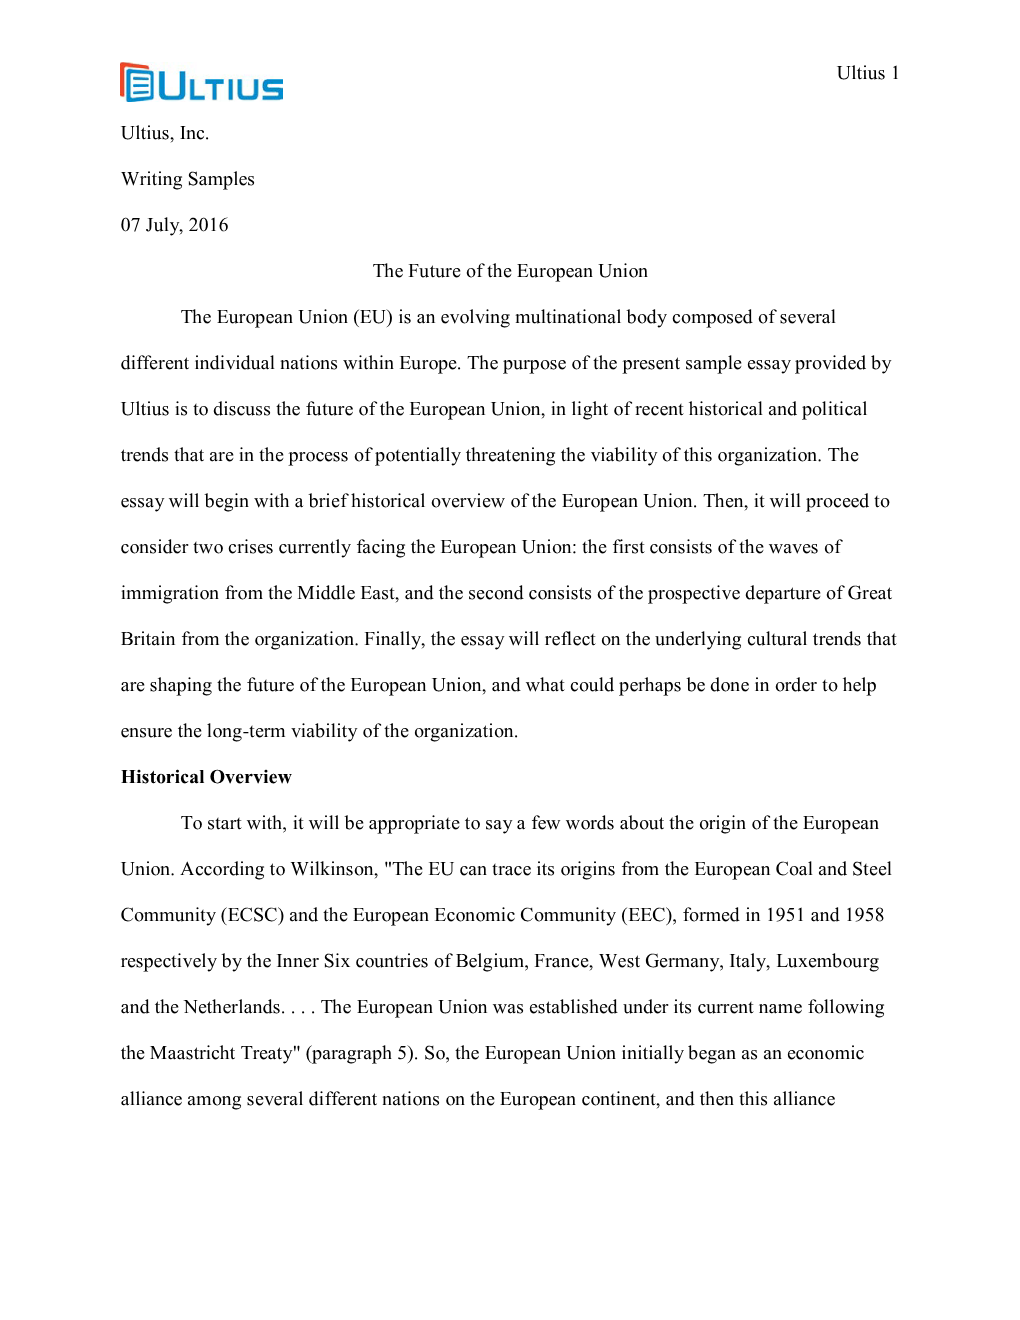 The Future of the European Union 6 Pages 7 Sources MLA